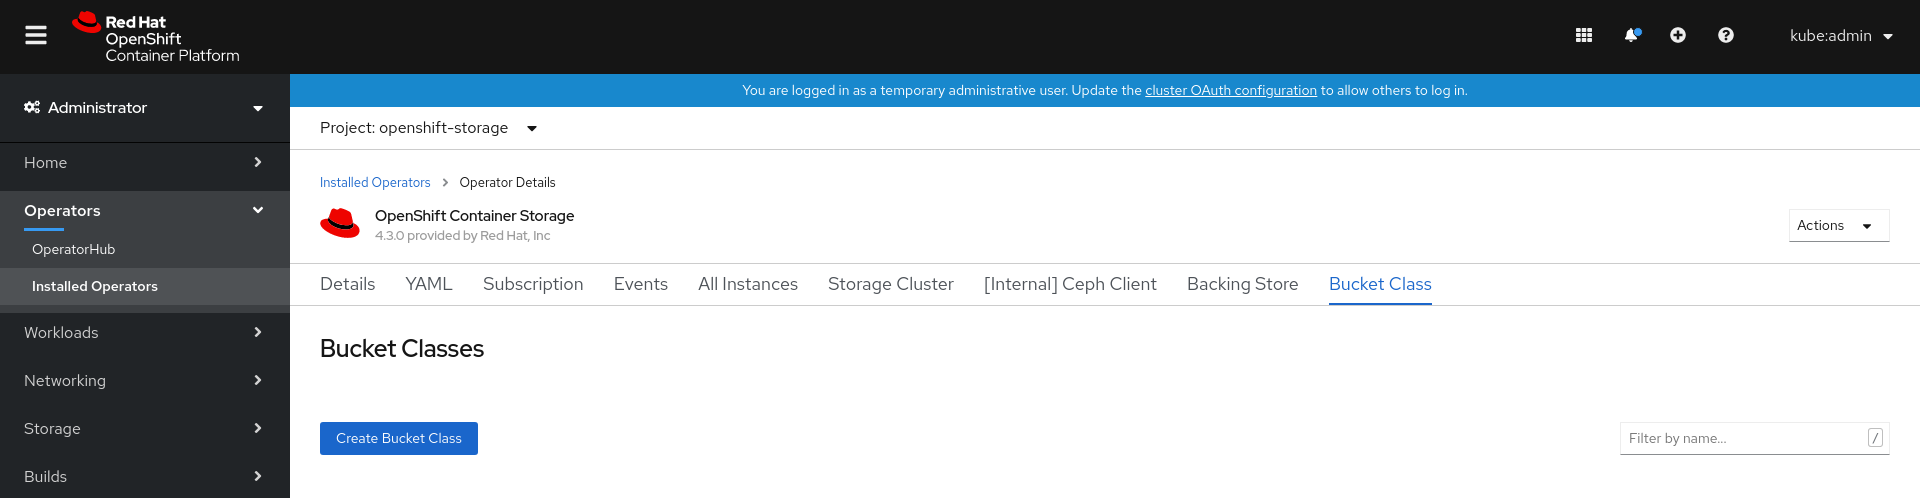 Screenshot of OpenShift Container Storage operator page with Bucket Class tab.